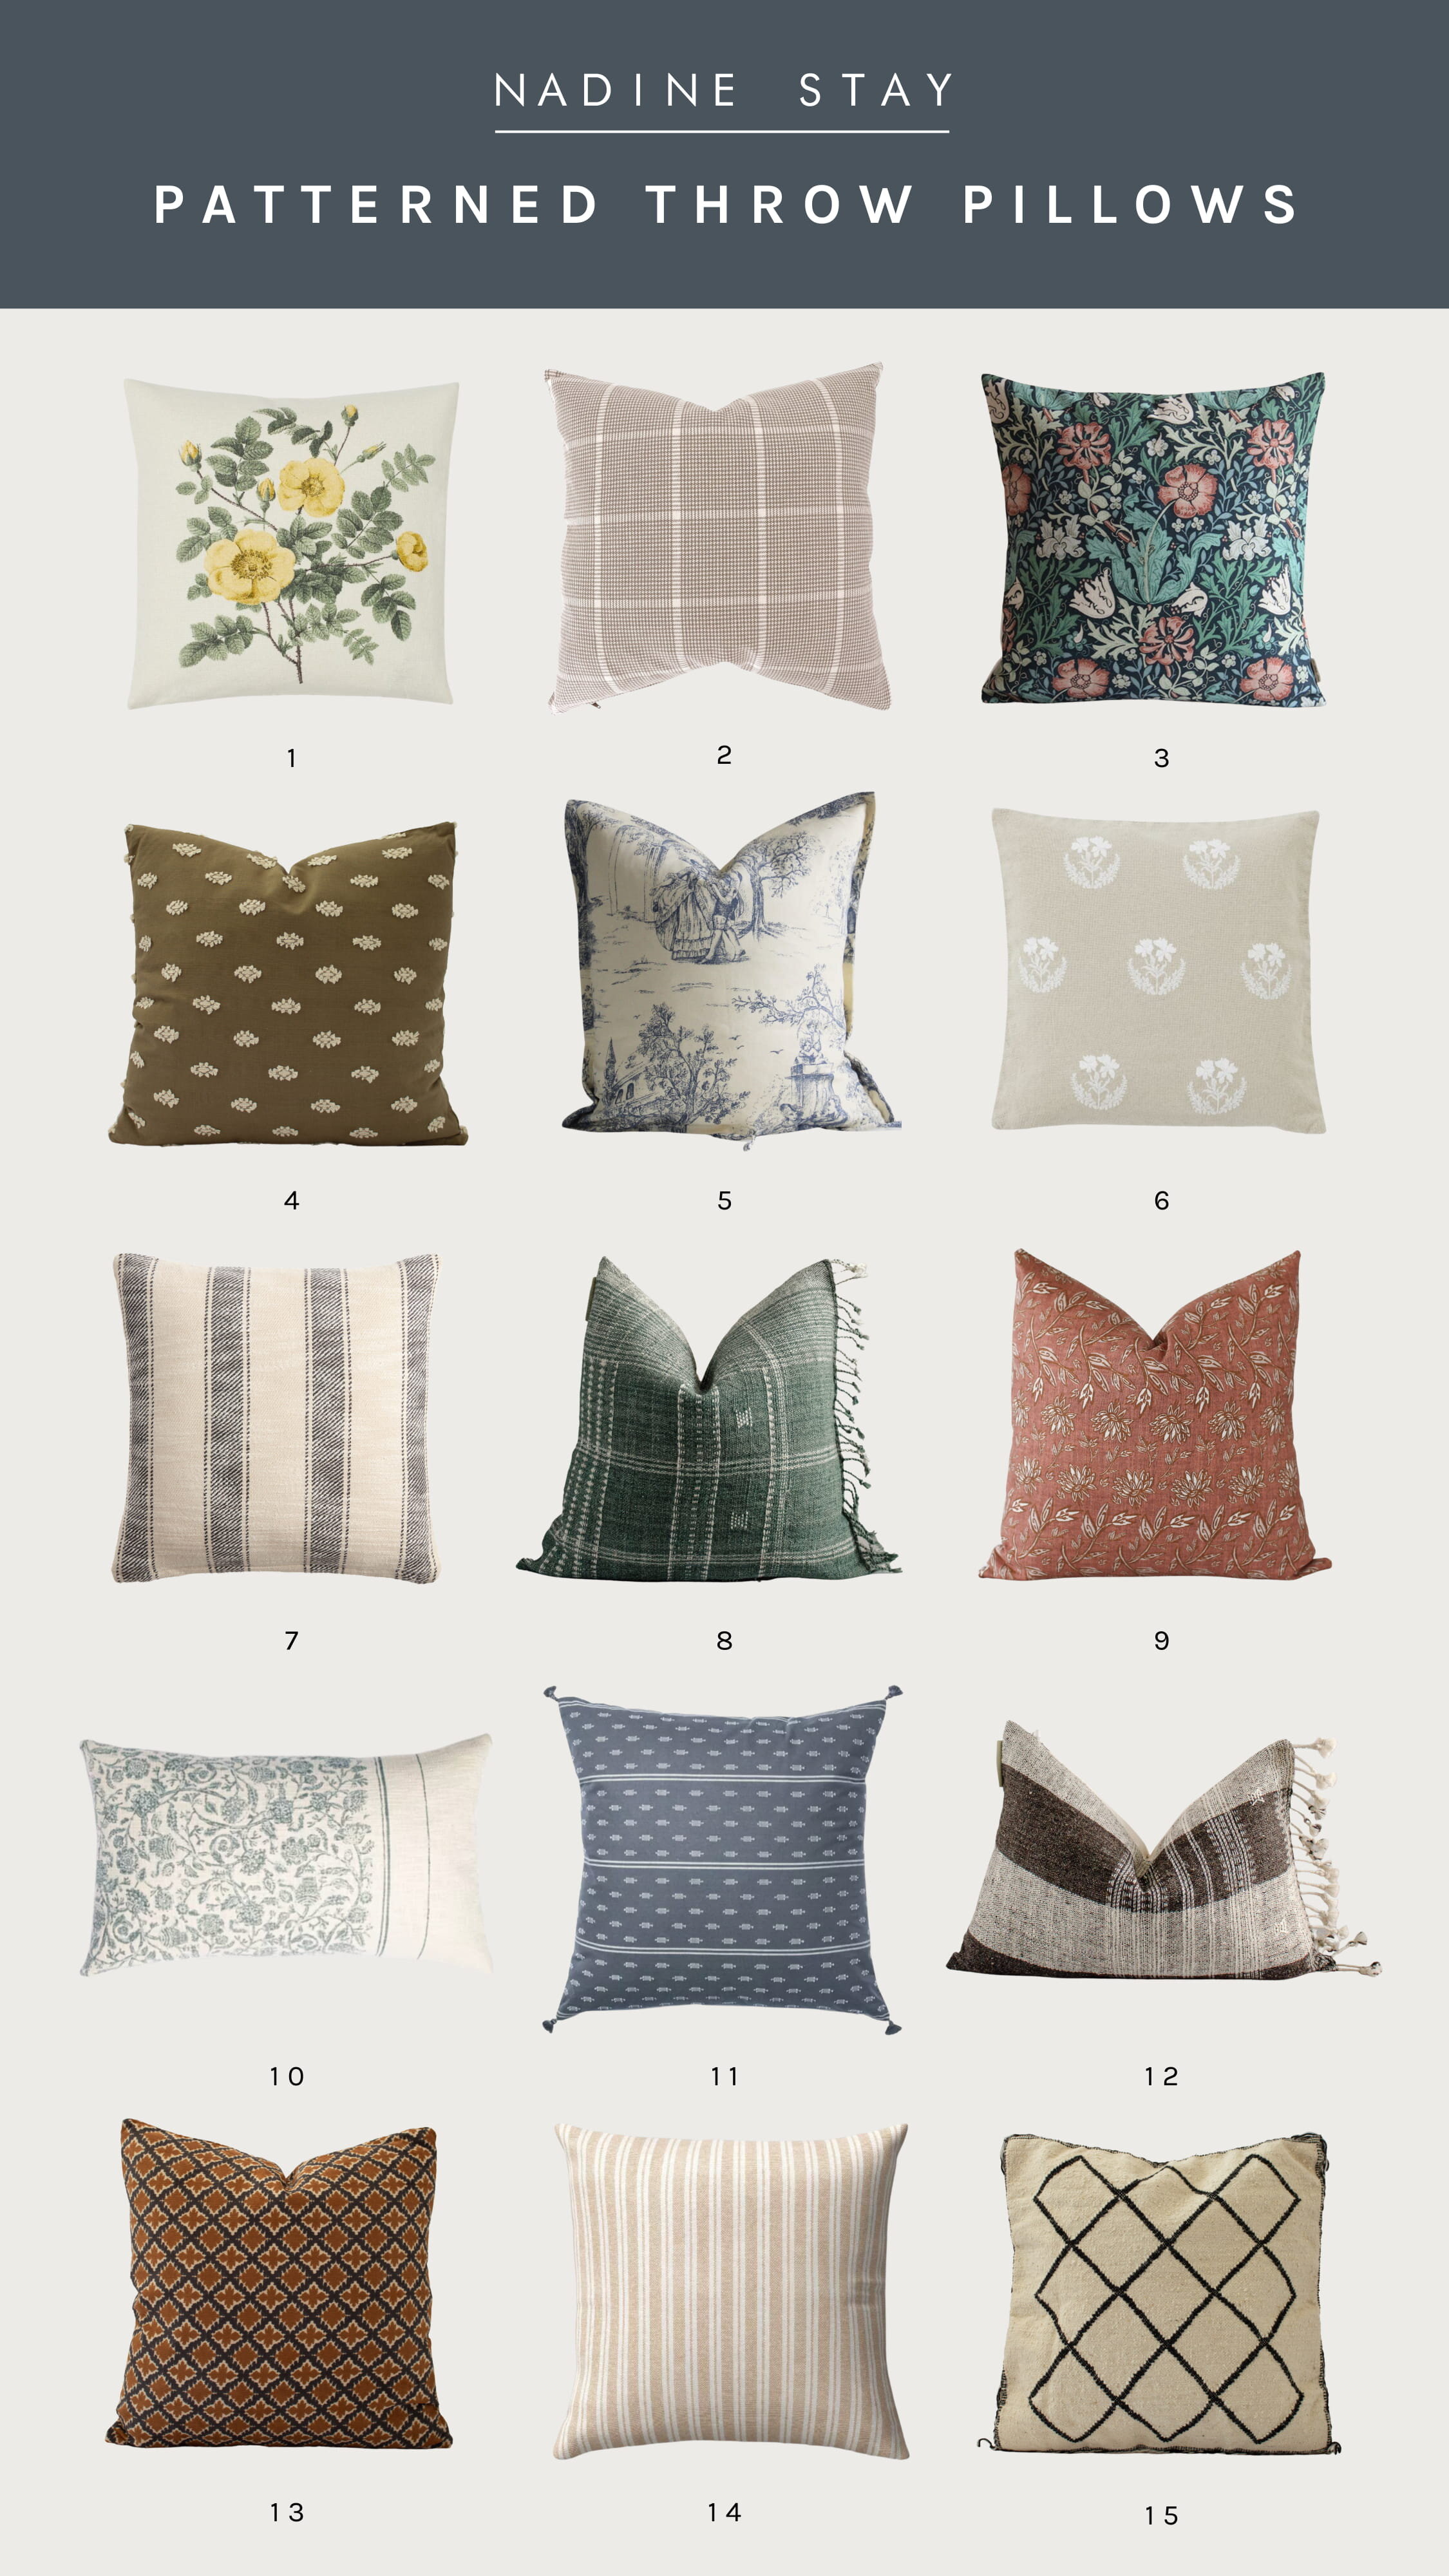 How to Mix and Match Pillows on a Sofa: 2023